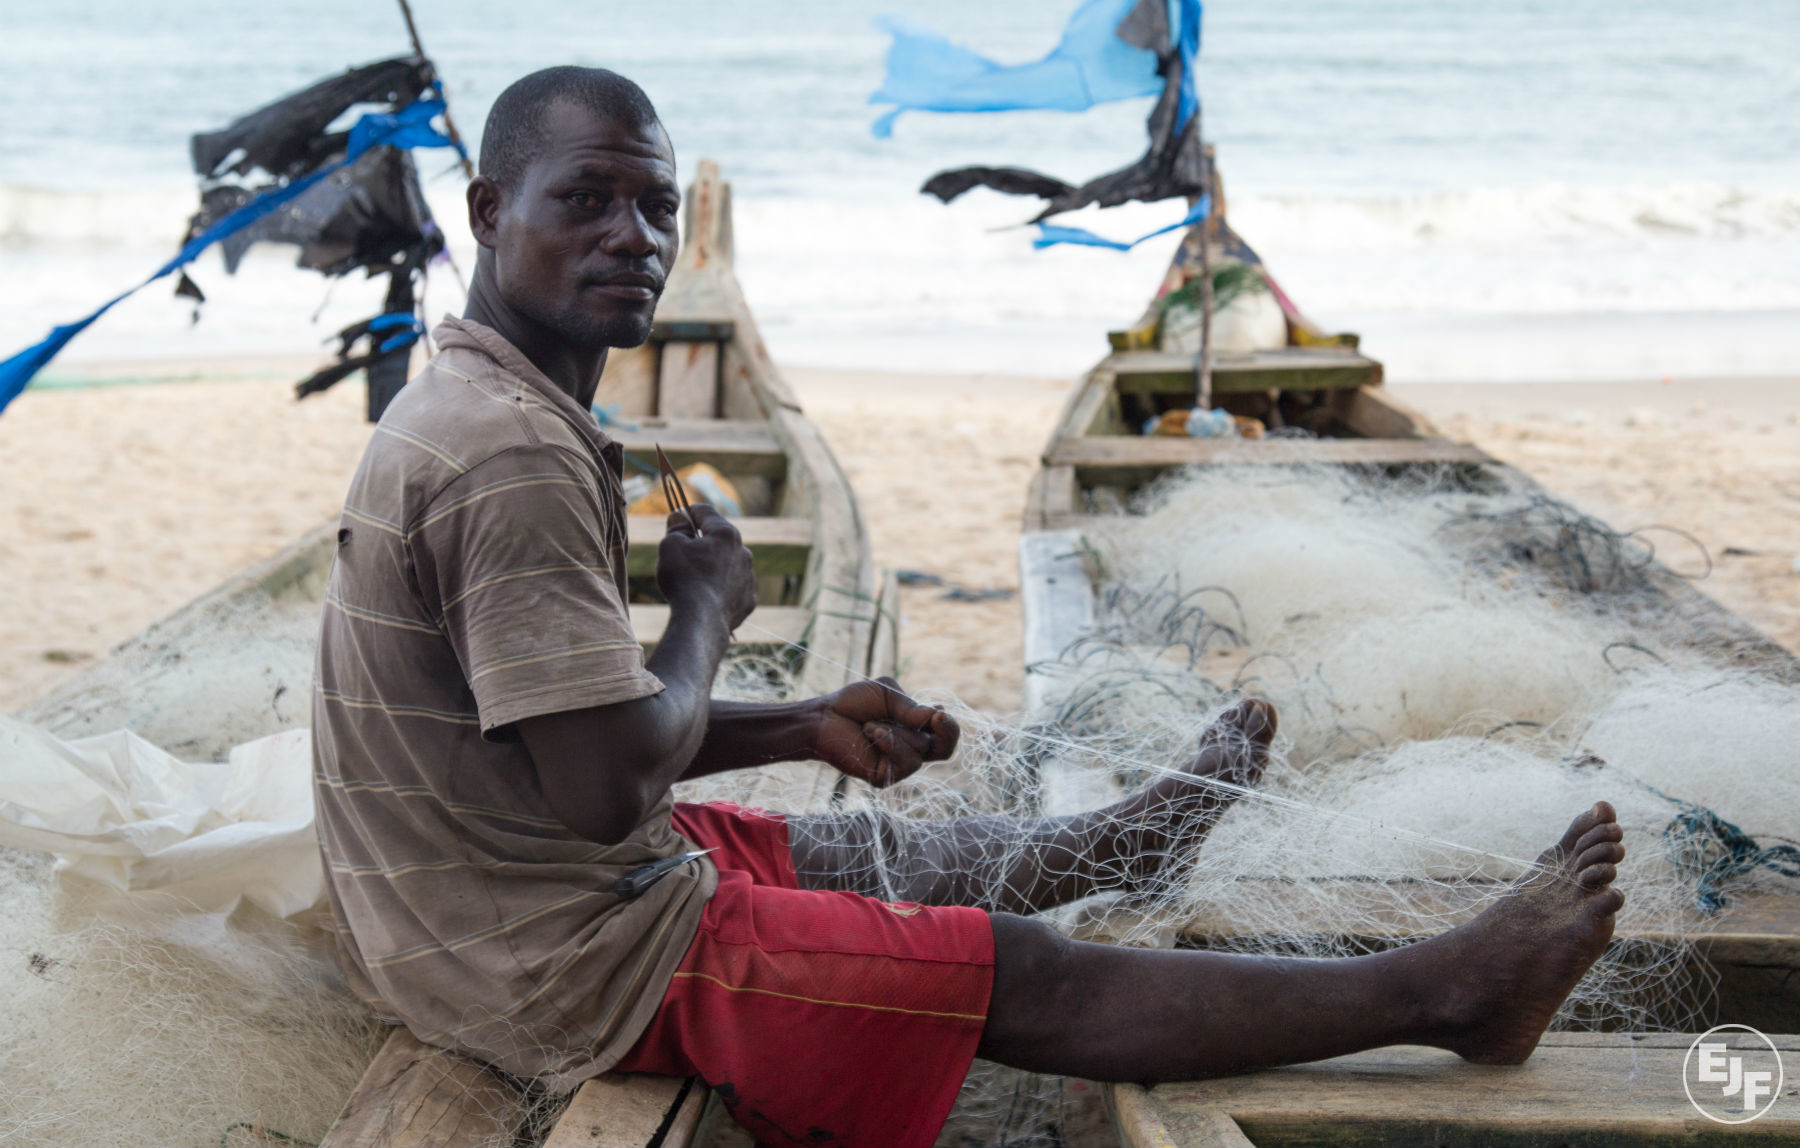 Fisheries project in Ghana hears of conflict between local fishing communities and industrial vessels